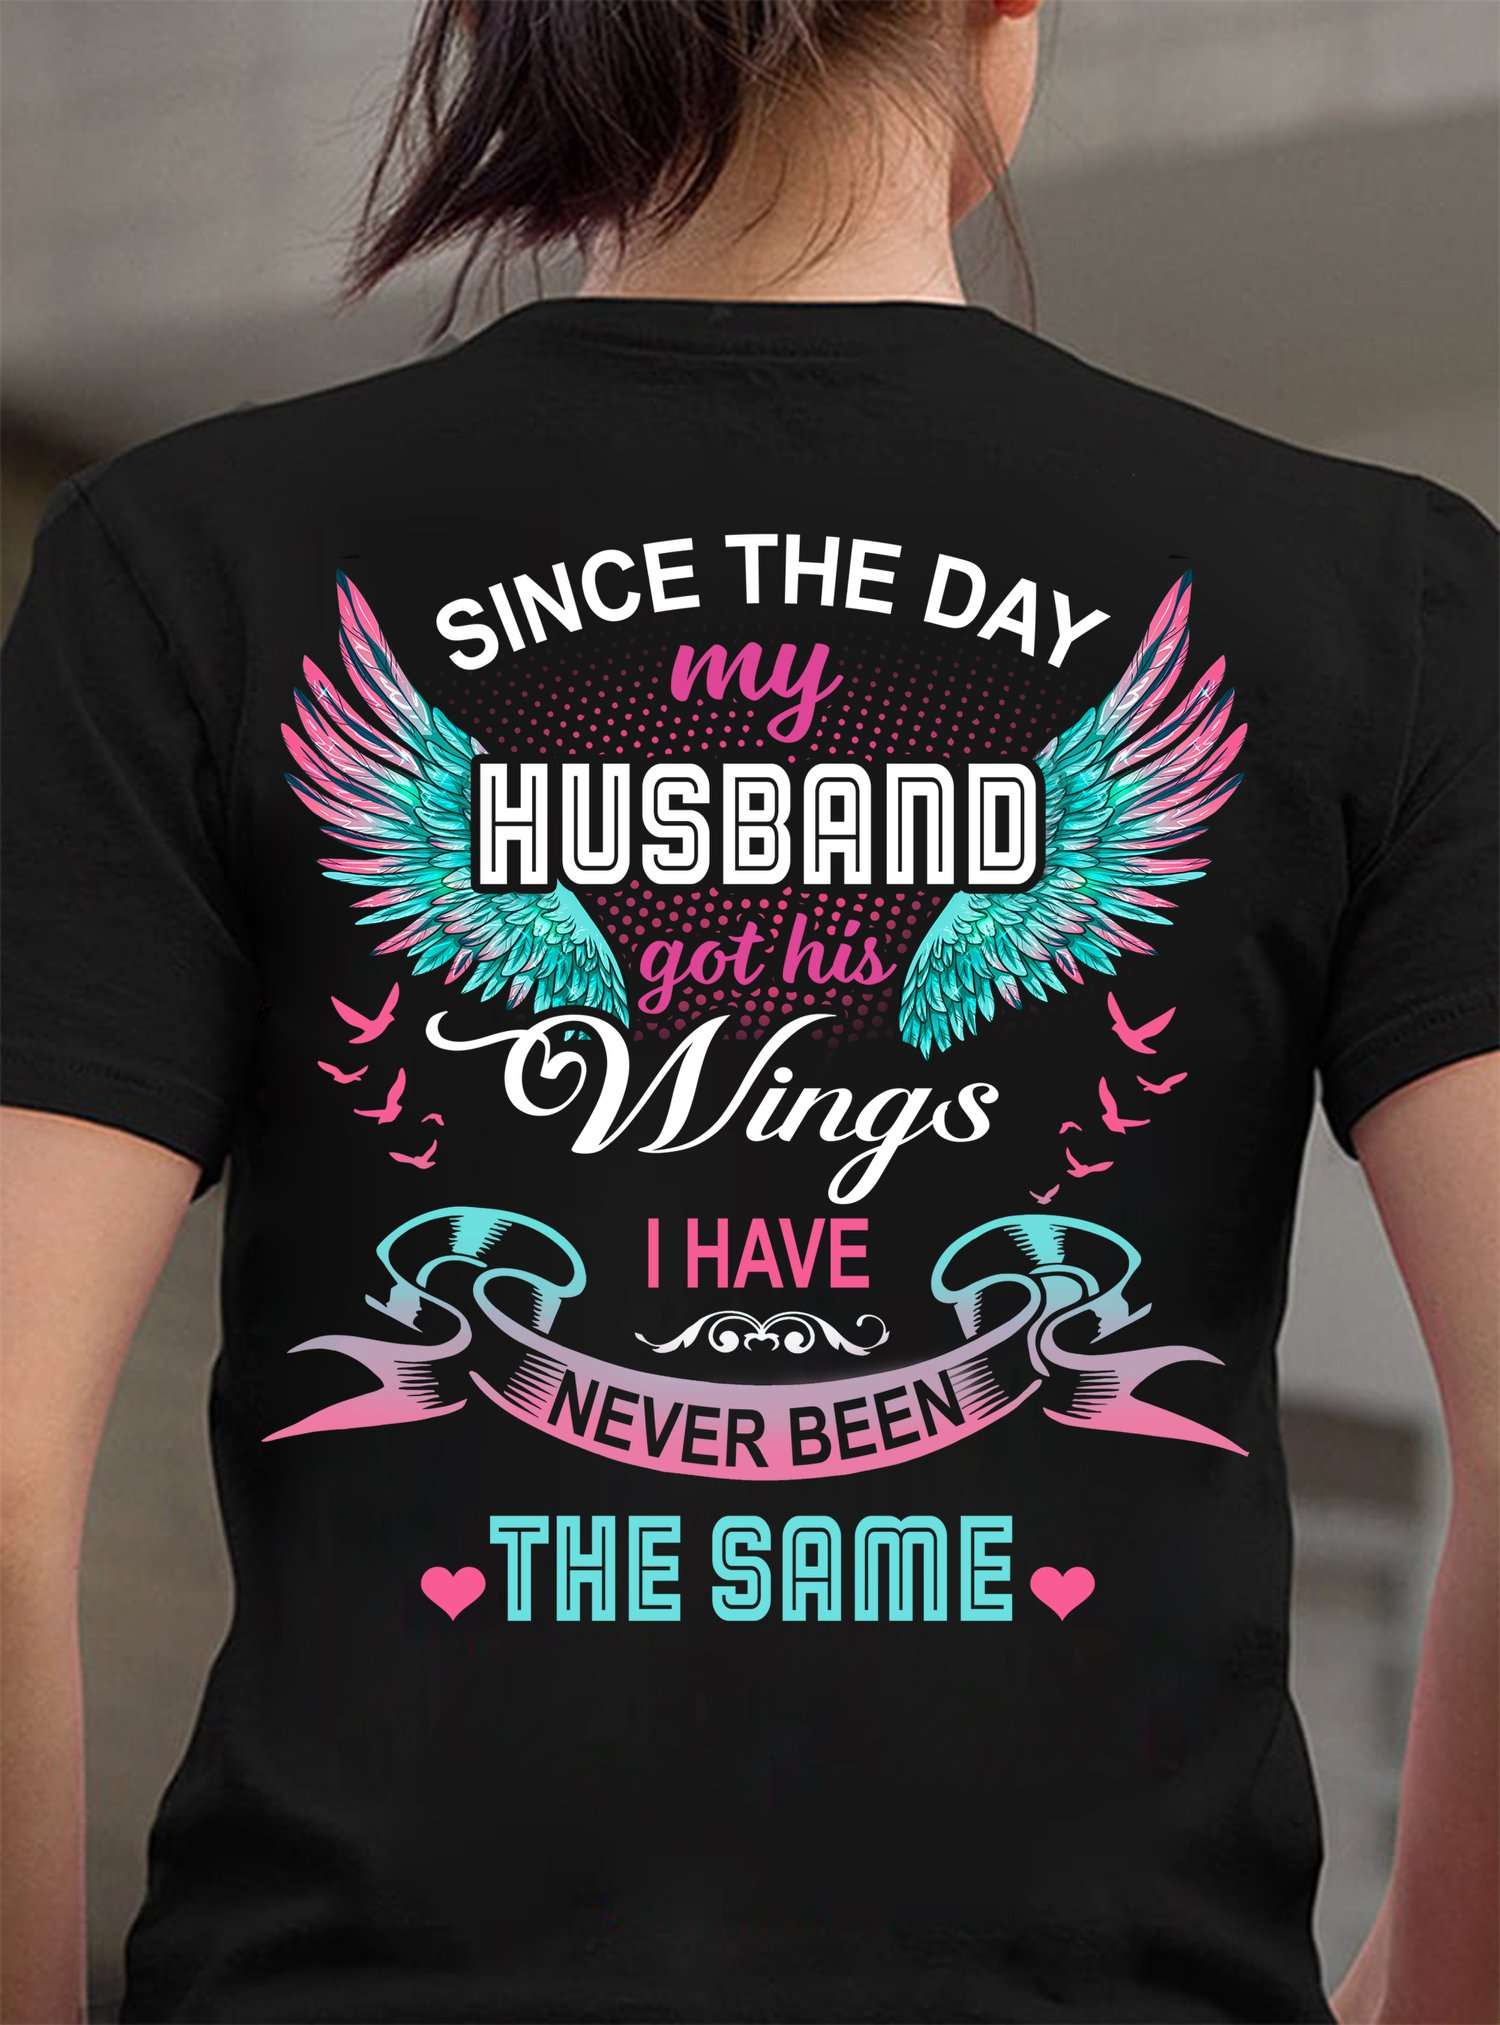 Since the day my husband got his wings I have never been the same - Husband with wings, husband in heaven